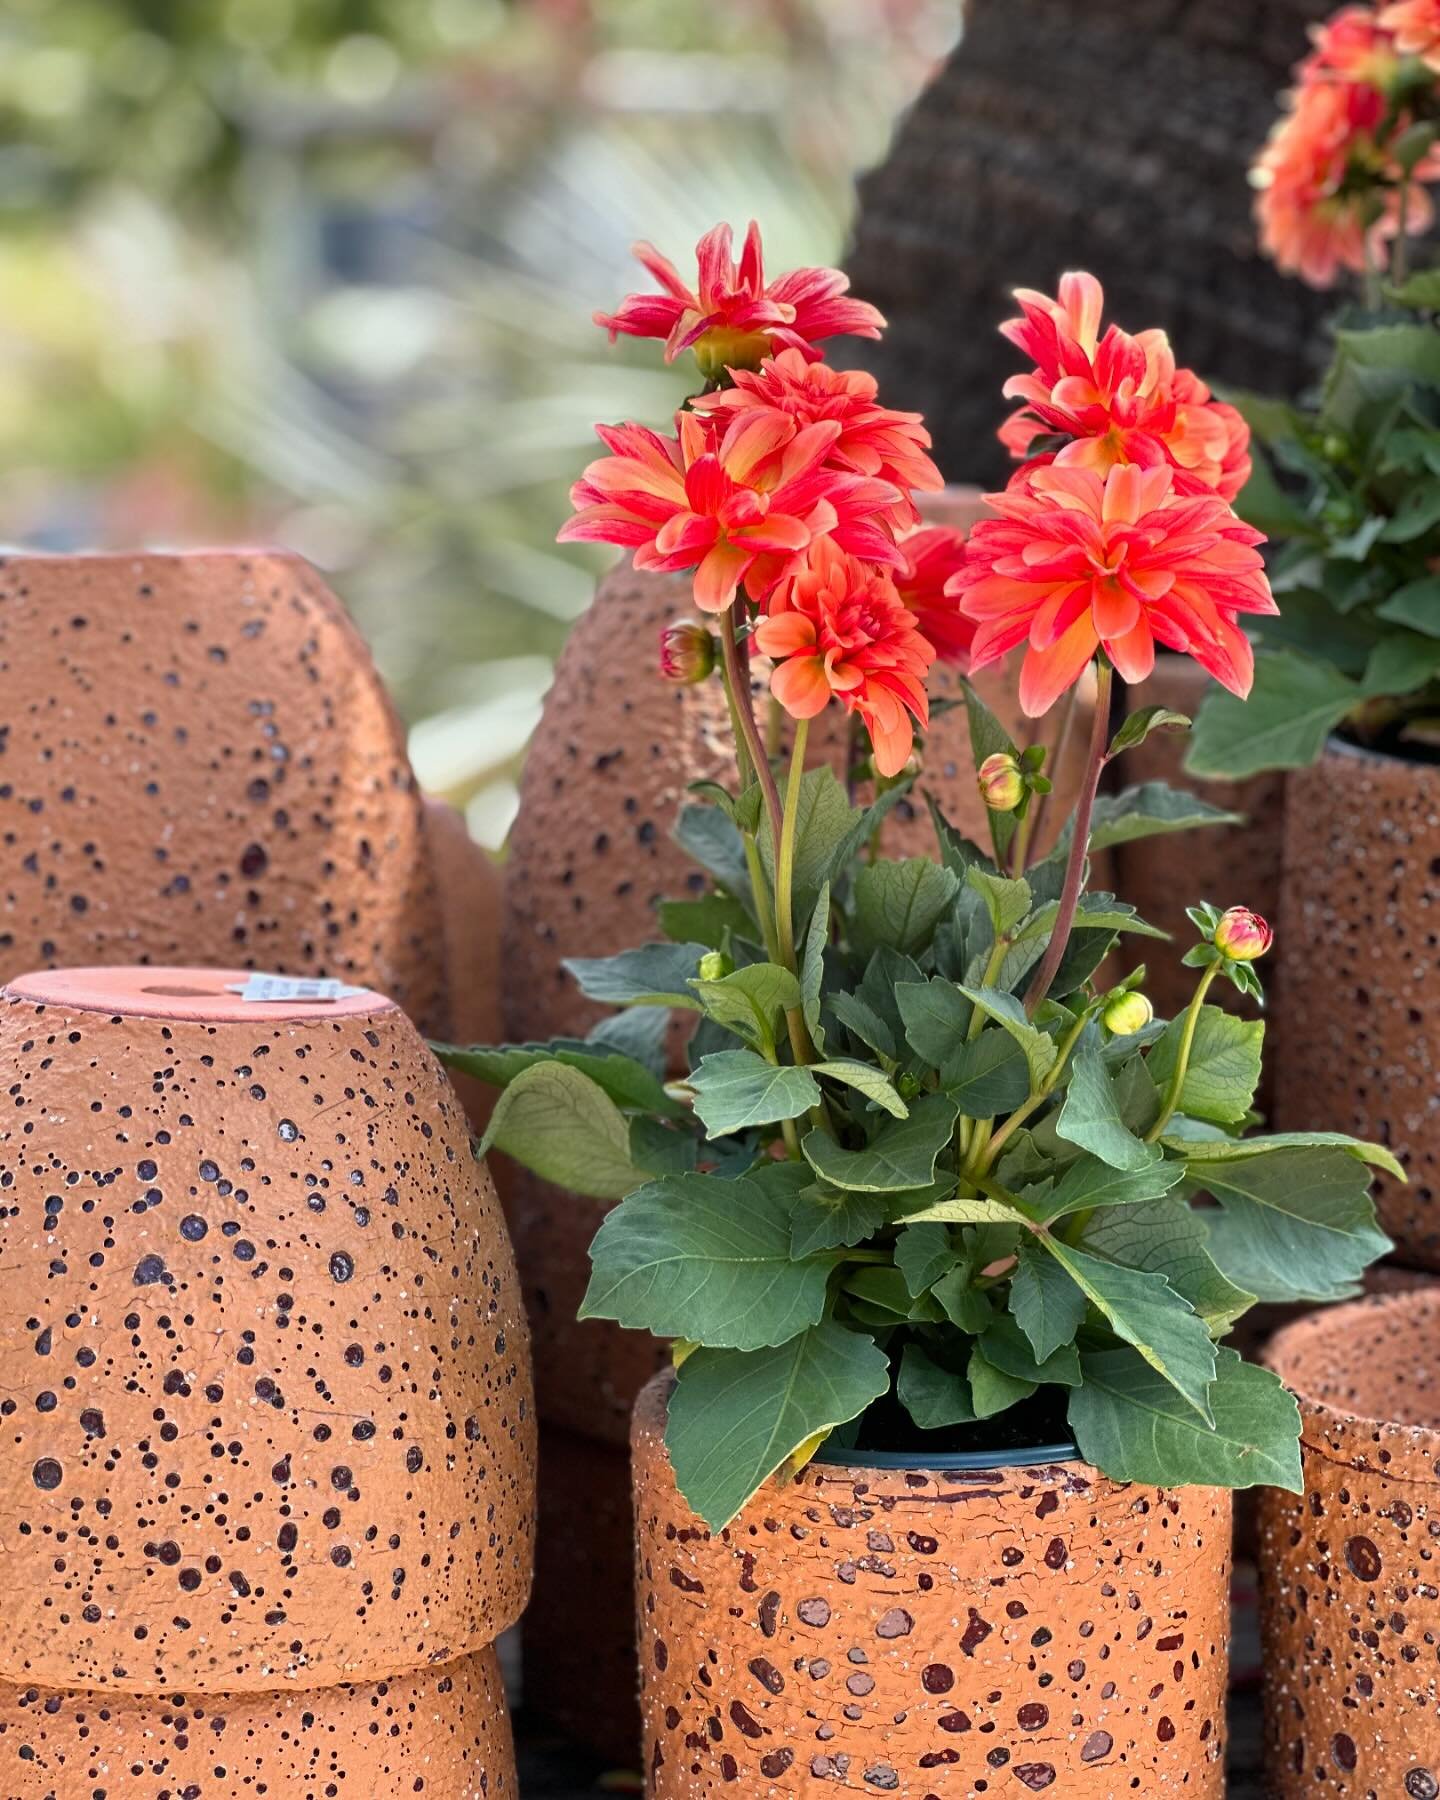 Loving the ocean rock pots in this rich color. Mix and match the shapes and sizes! In stock at both stores. (Also: it&rsquo;s dahlia time!! 🧡🧡🧡)

#floragrubbgardens #pots #gardenpots #pottery #containergardening #patiodesign #deckdesign #gardening